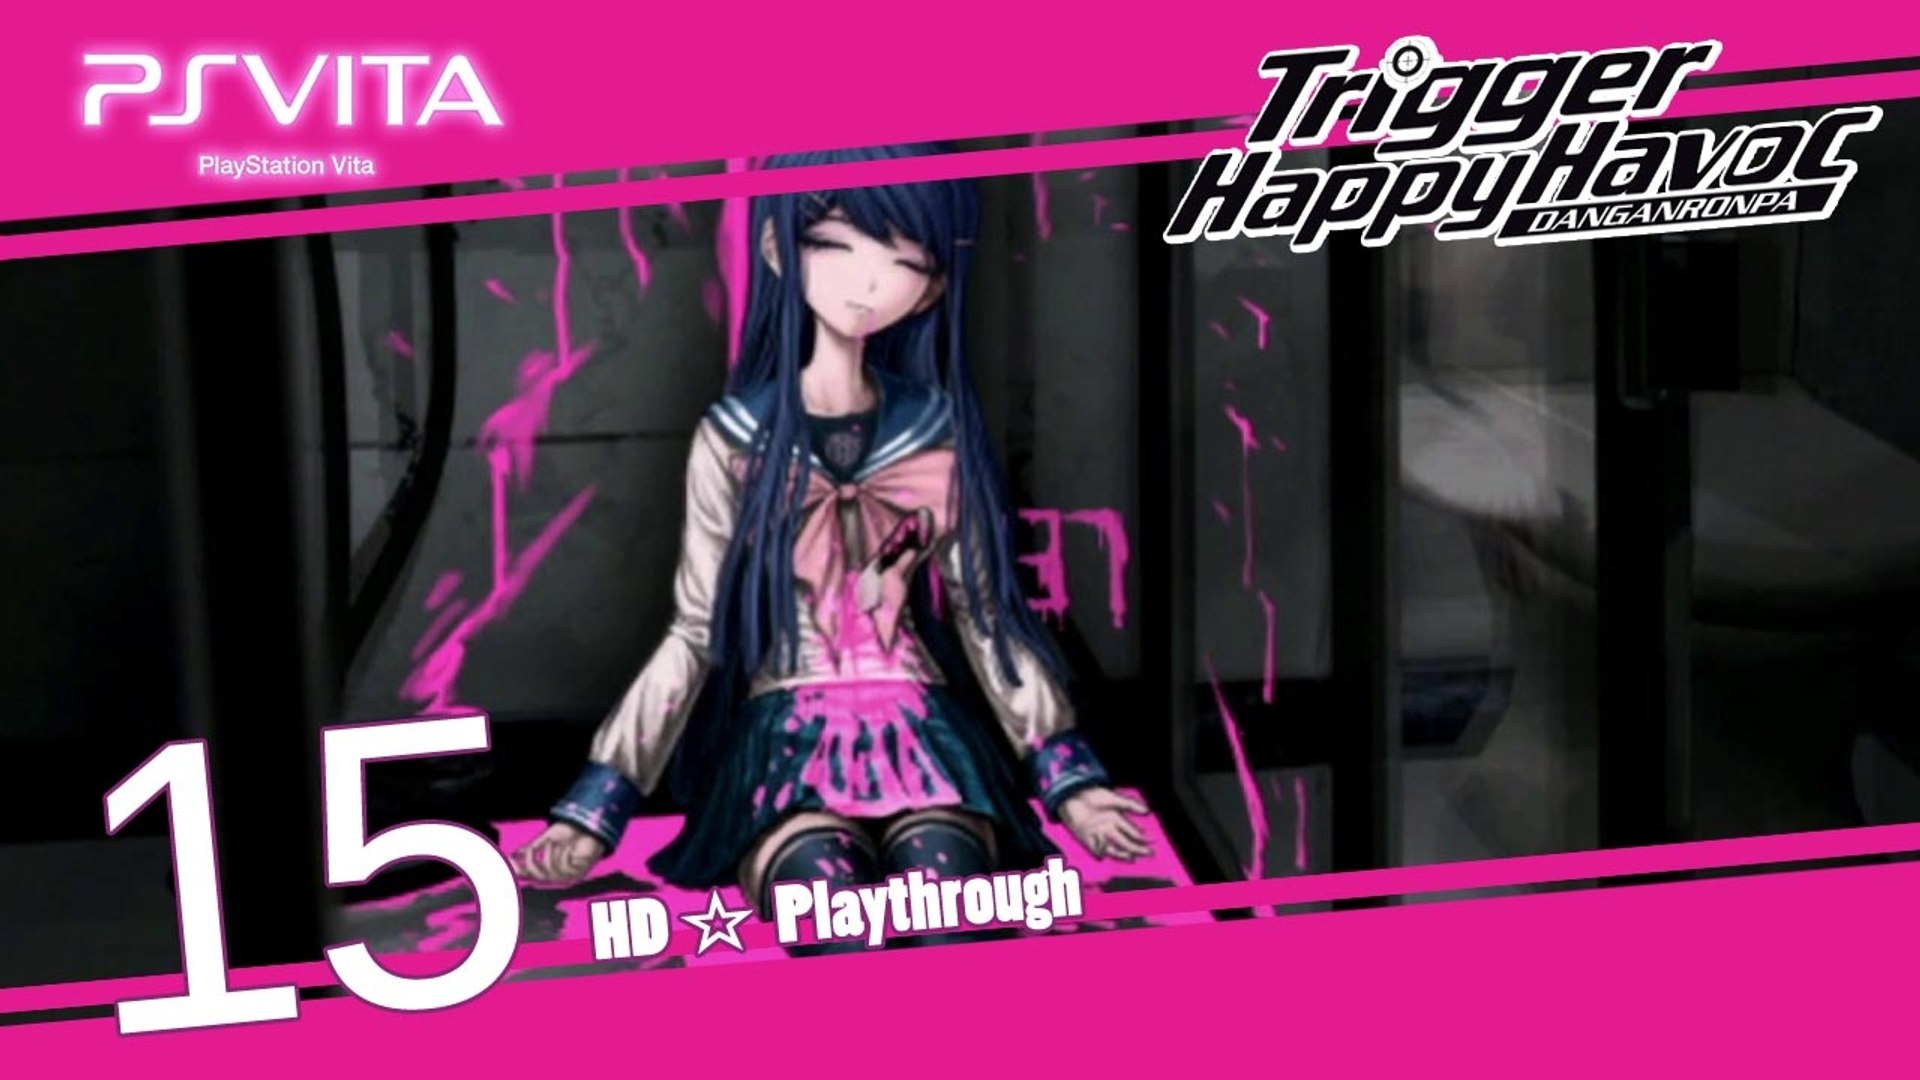 Danganronpa Trigger Happy Havoc Psv Pt 15 Chapter 1 To Survive Class Trial Video Dailymotion